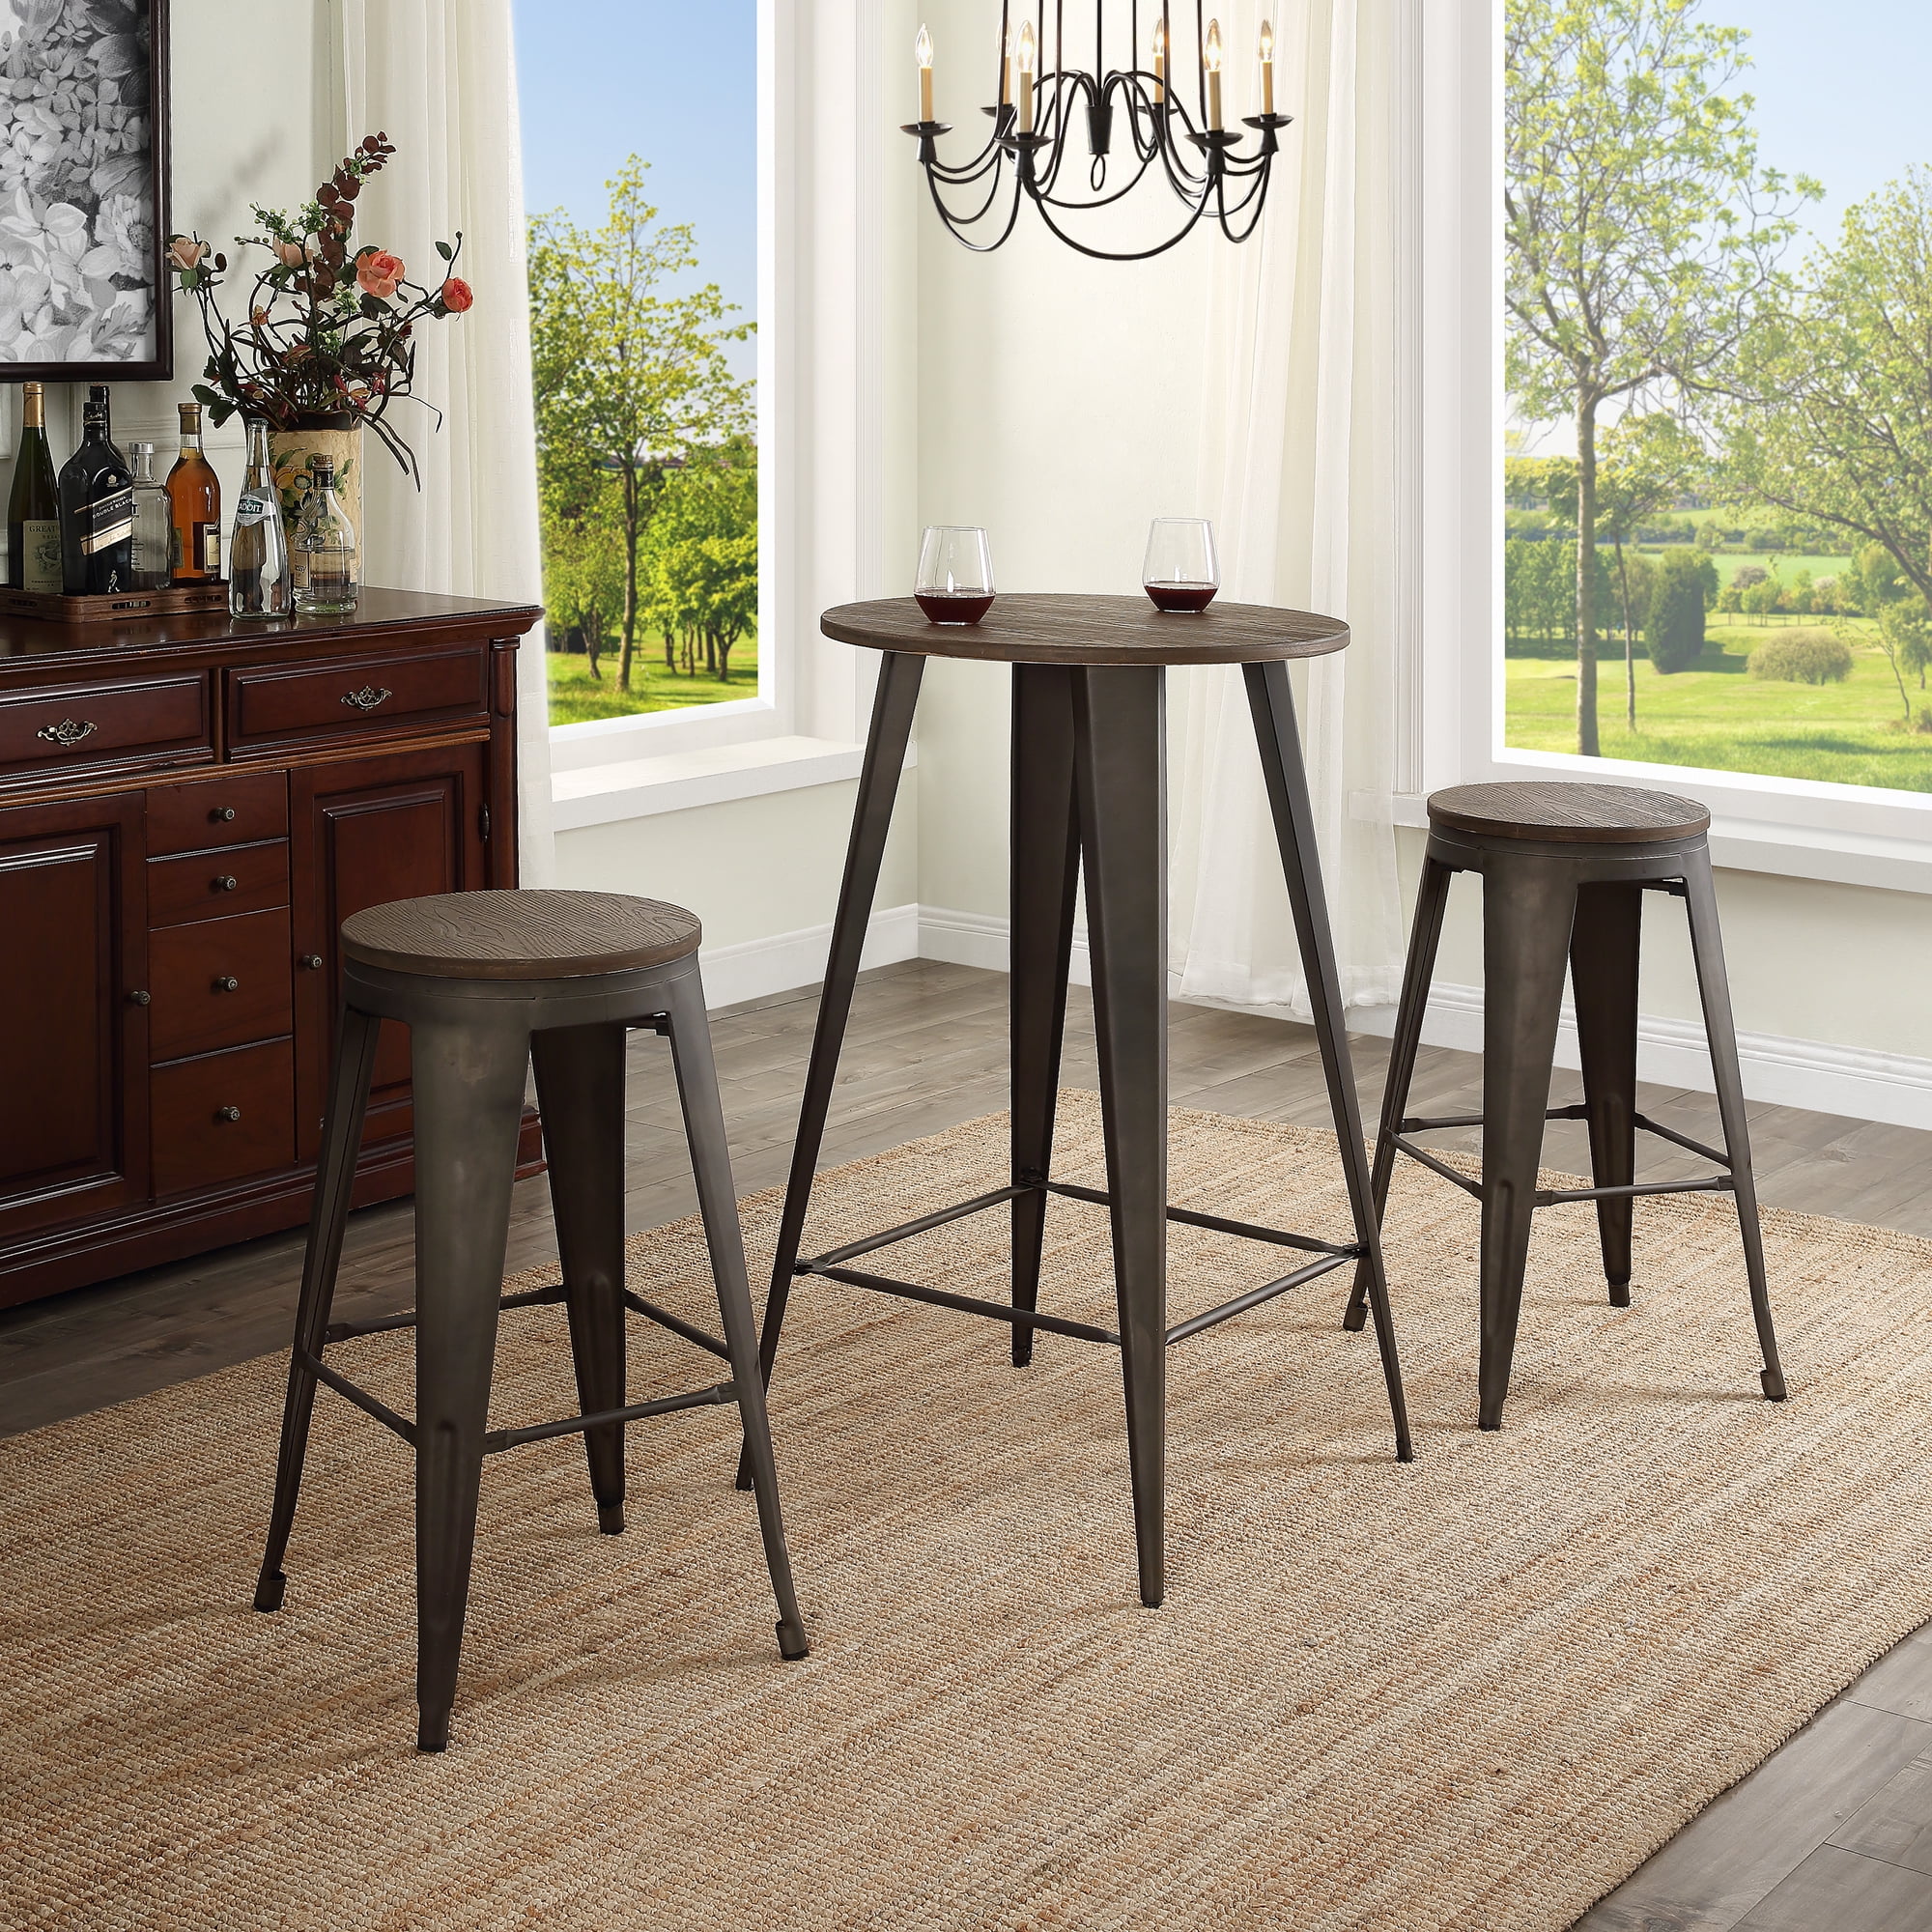 Dining Table Set With 2 Bar Stools, Small Bar And Stools